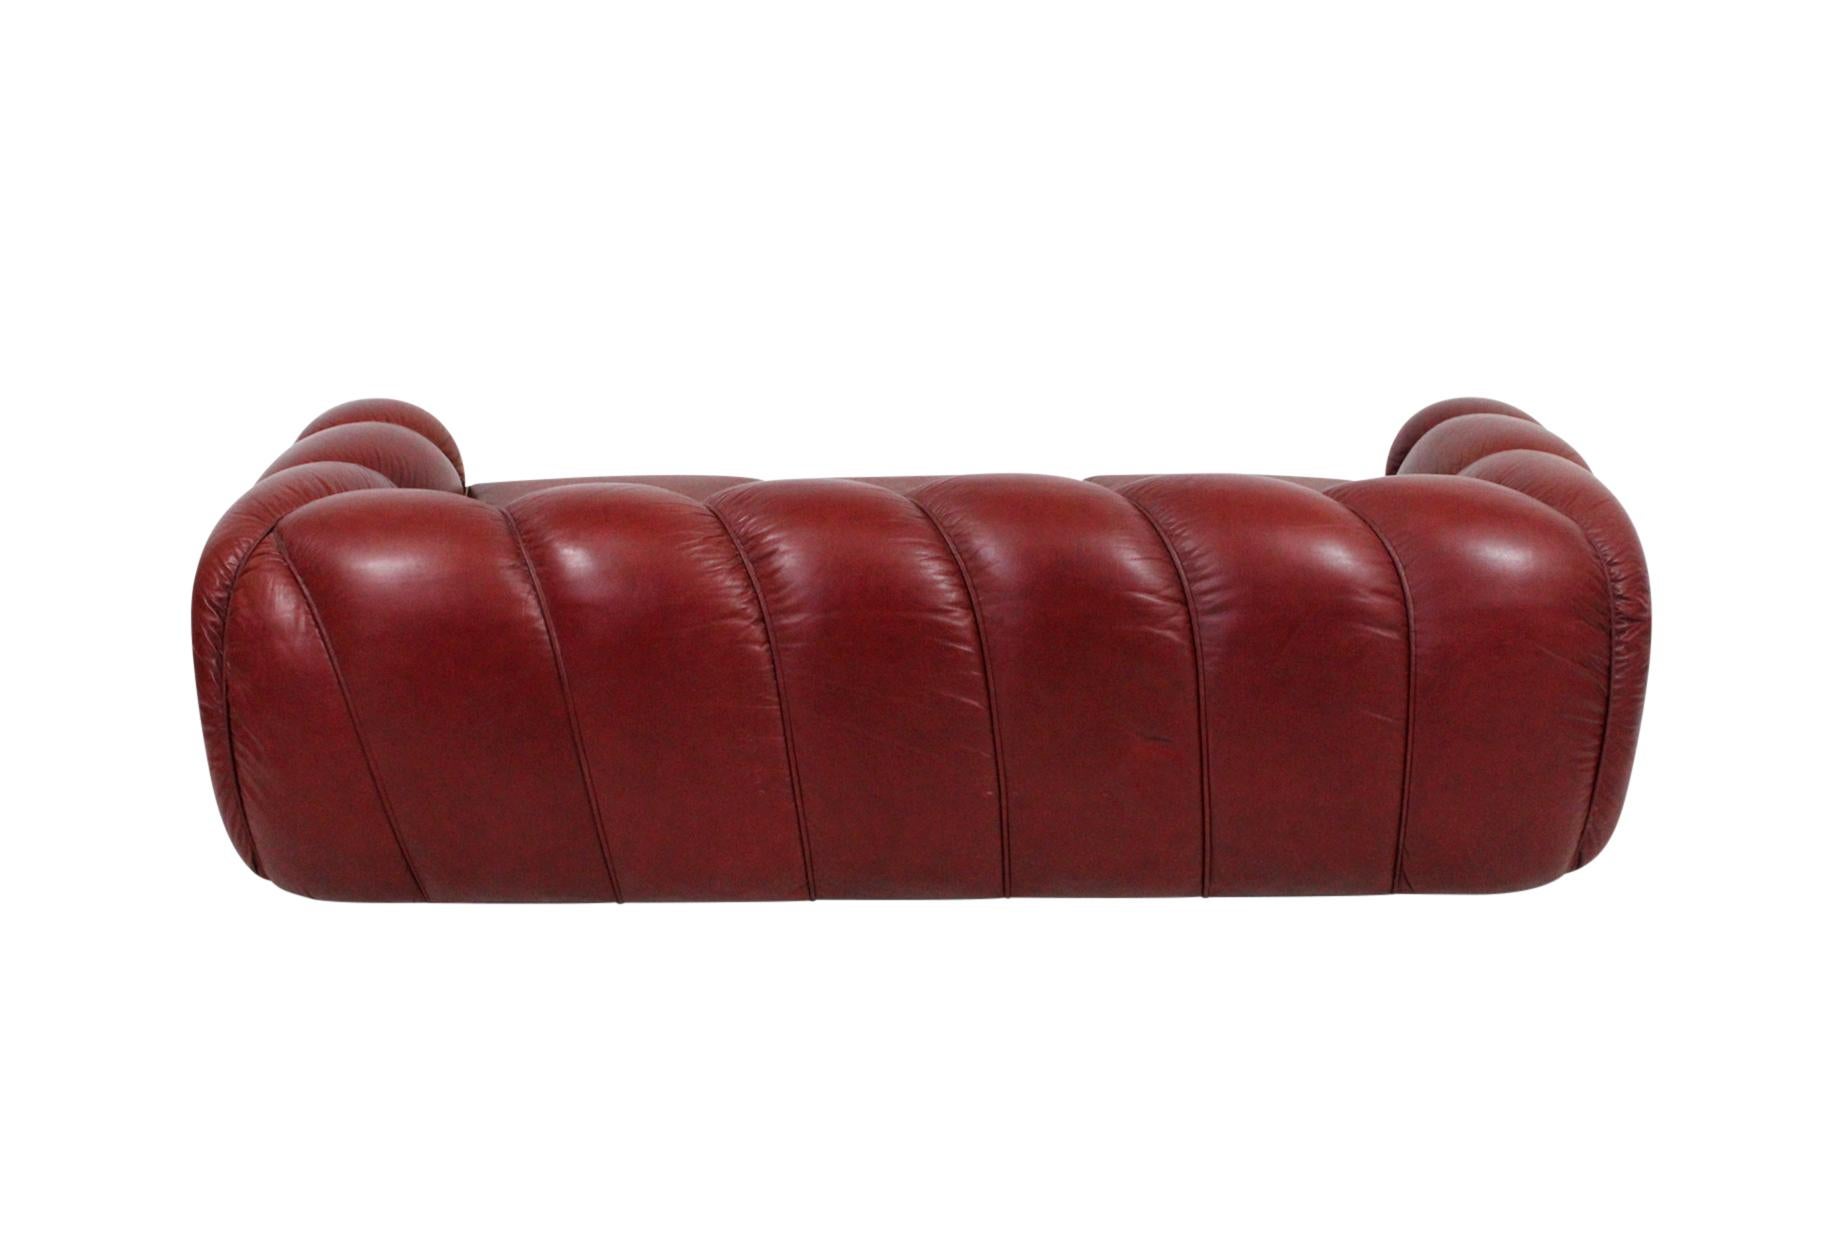 Mid-Century Modern Leather Sofa by Vivai del Sud